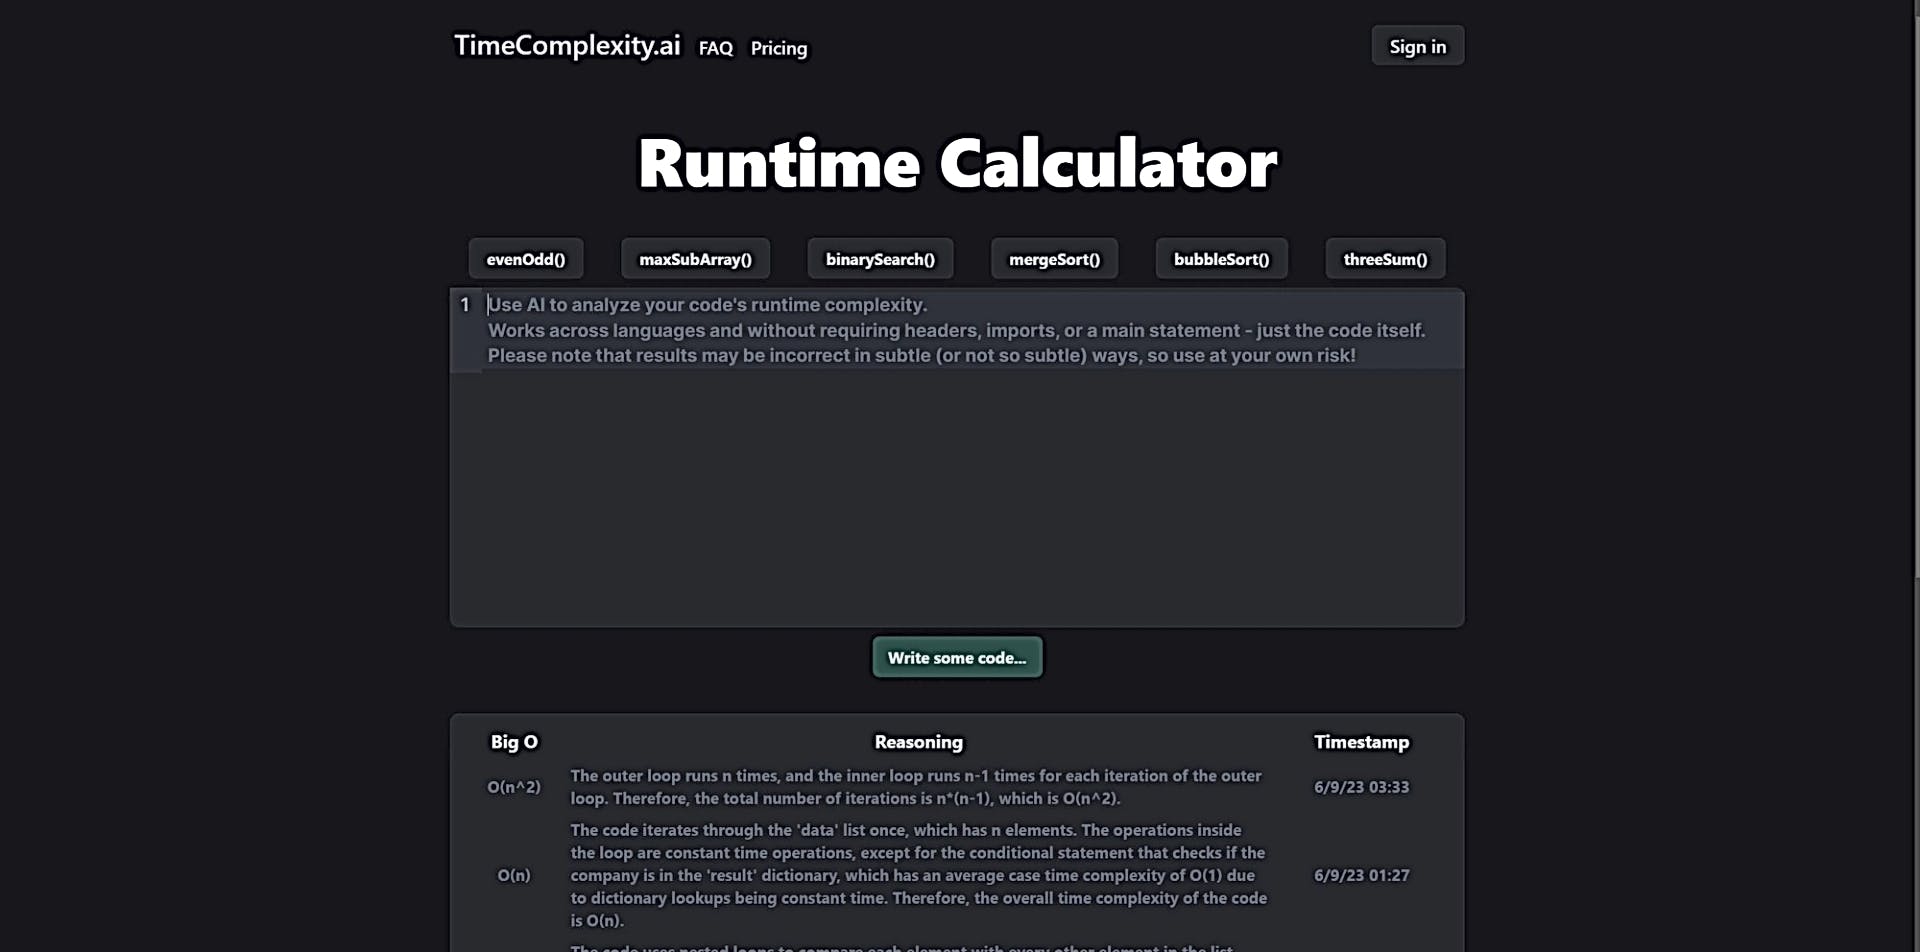 TimeComplexity featured